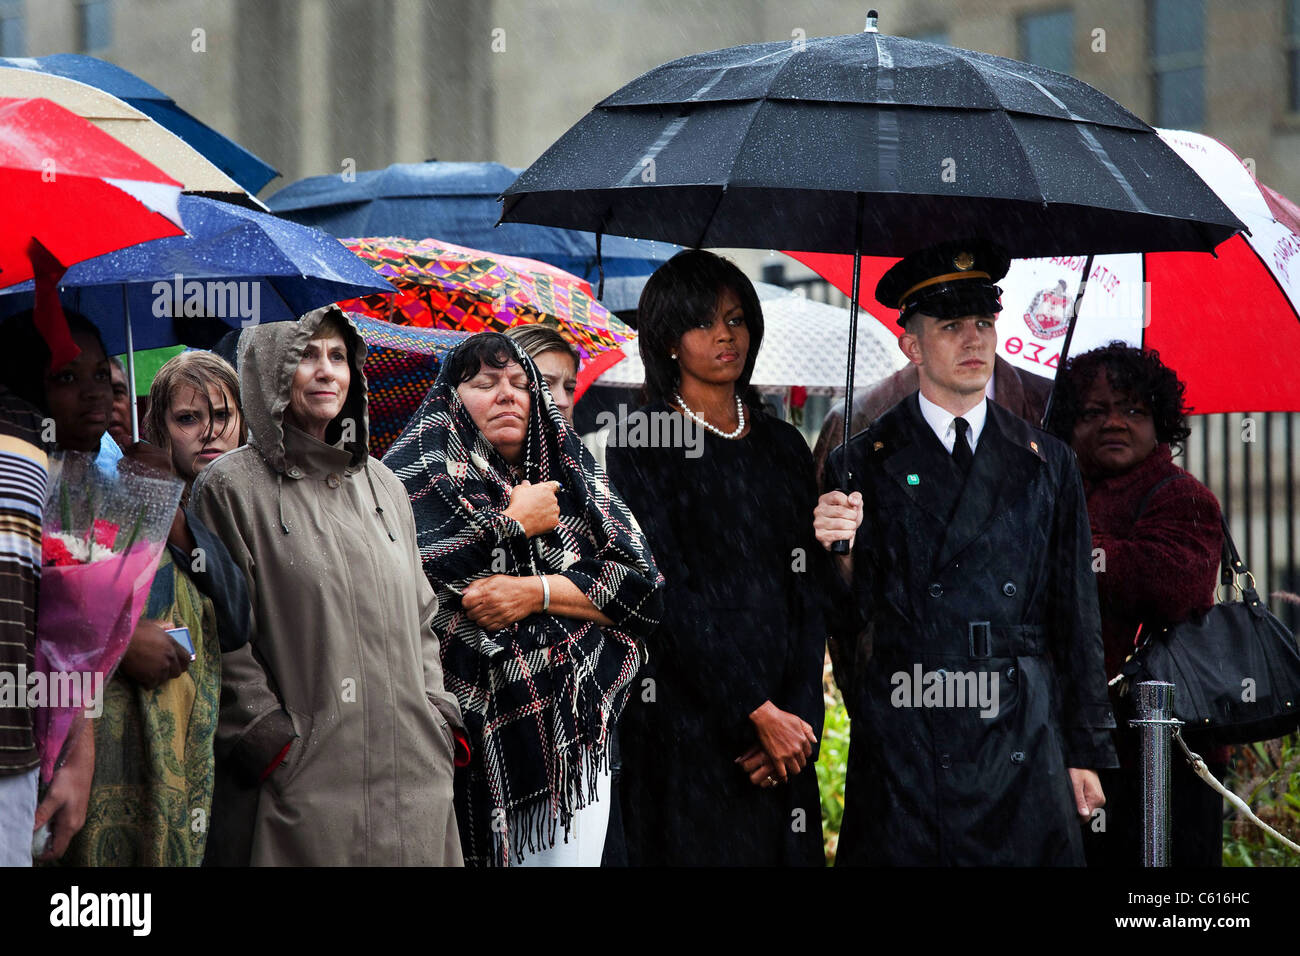 Michelle Obama attends a wreath laying ceremony at the Pentagon on the rainy eighth anniversary of the 9/11 terrorist attacks. Sept. 11 2009., Photo by: Everett Collection(BSLOC 2011 7 108) Stock Photo